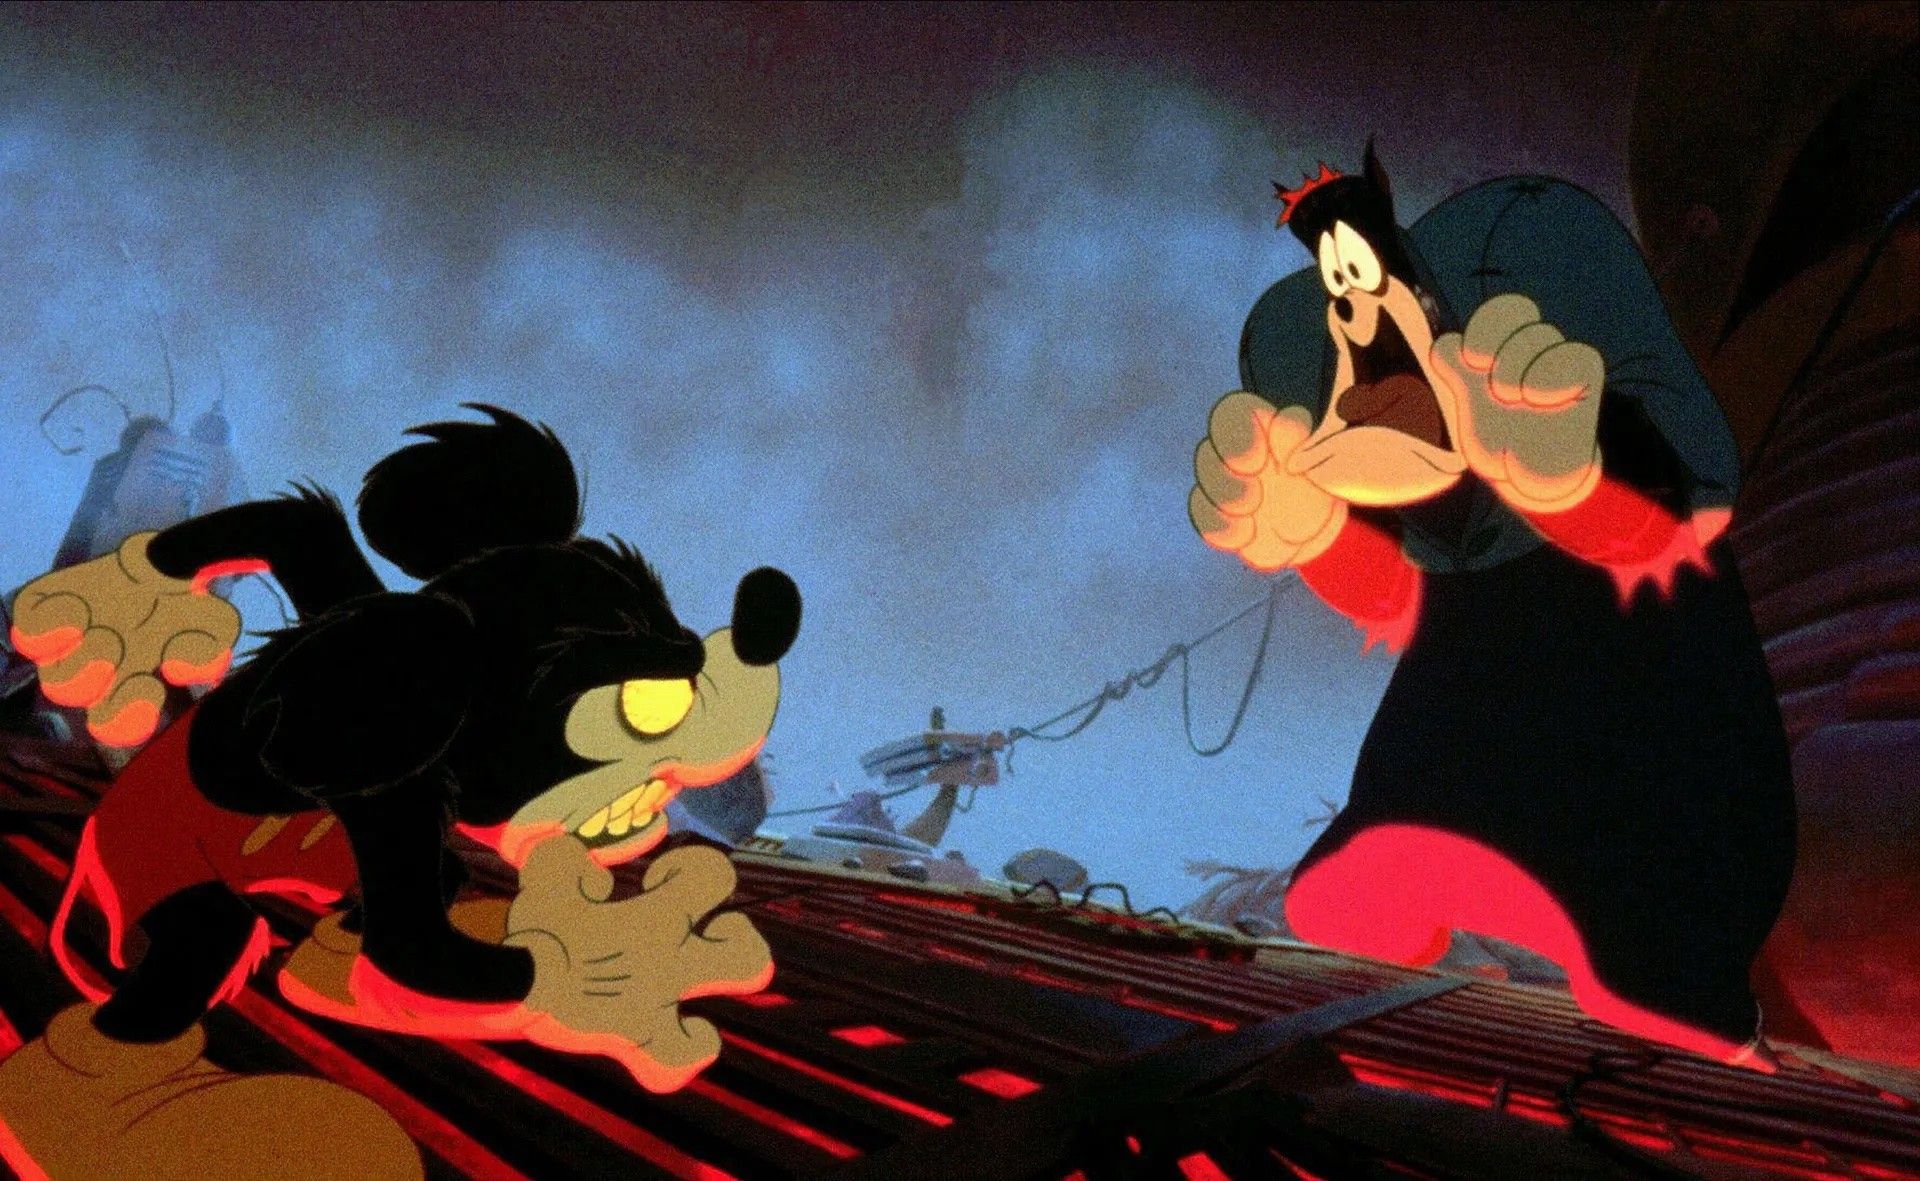 The Evil Mickey Short That Disney Doesn't Want You to See